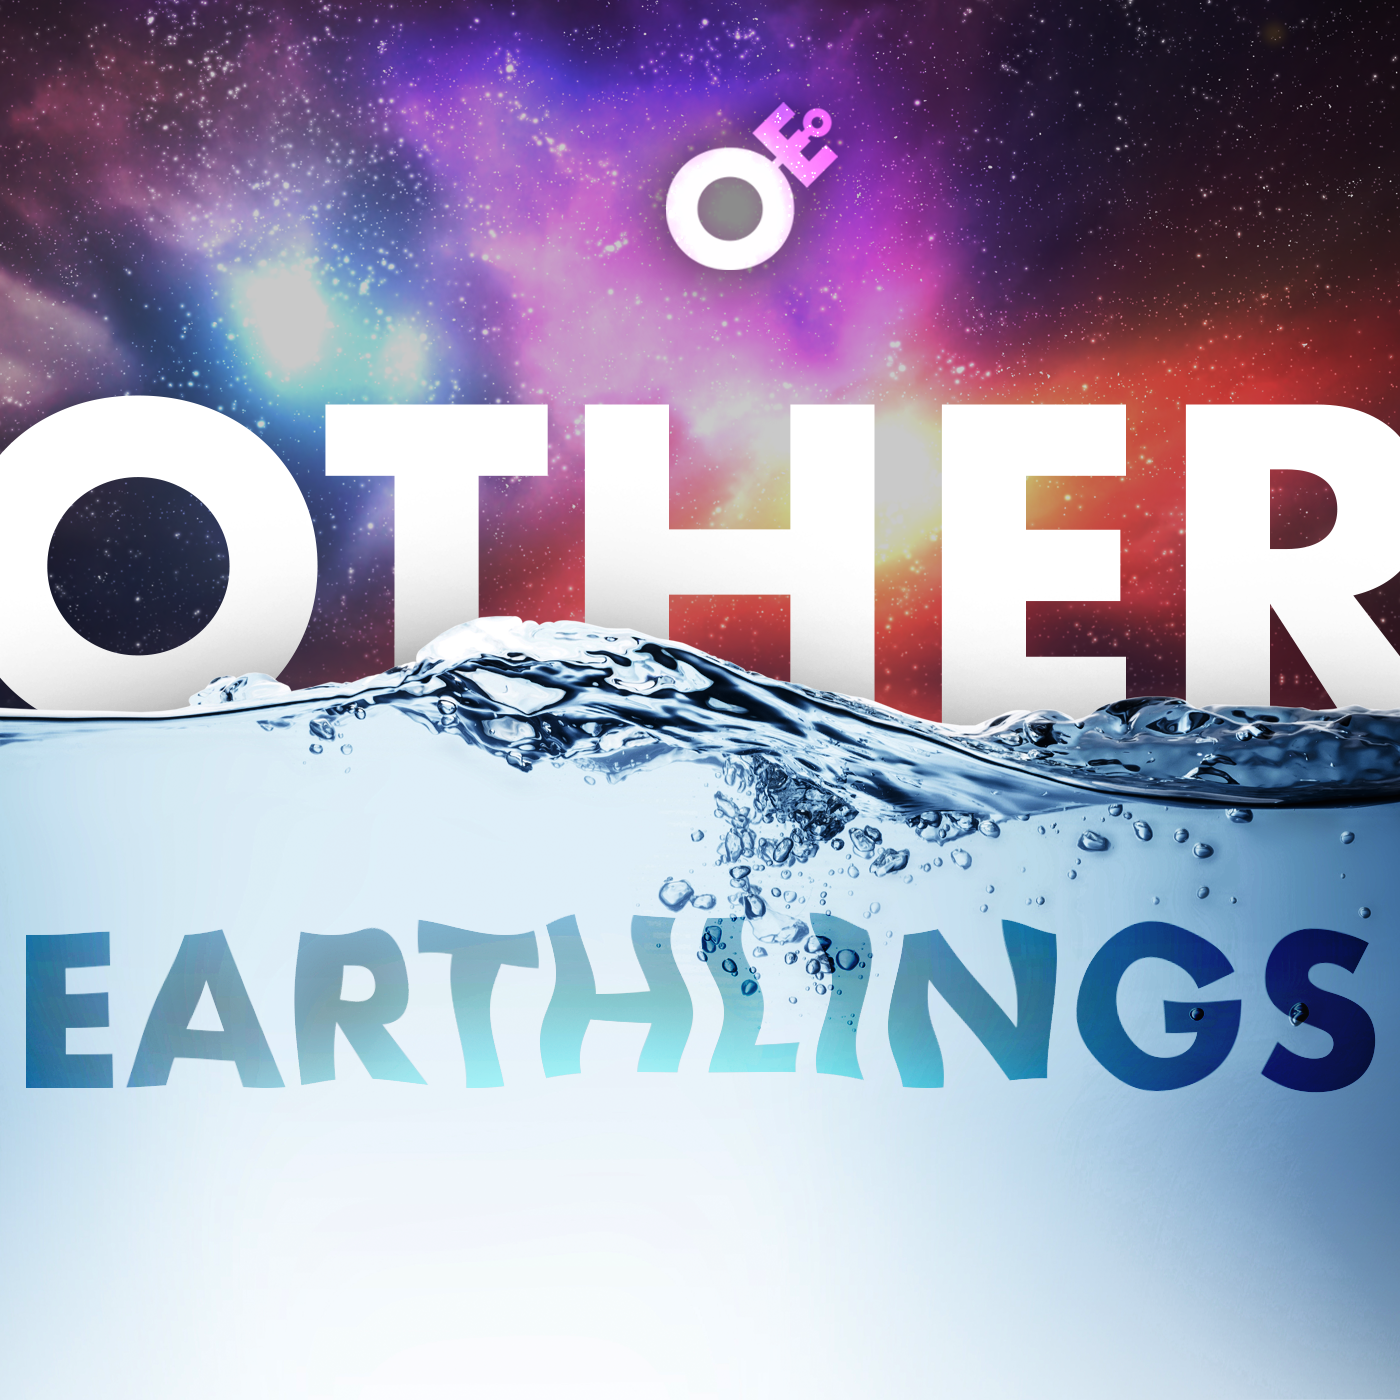 Other Earthlings